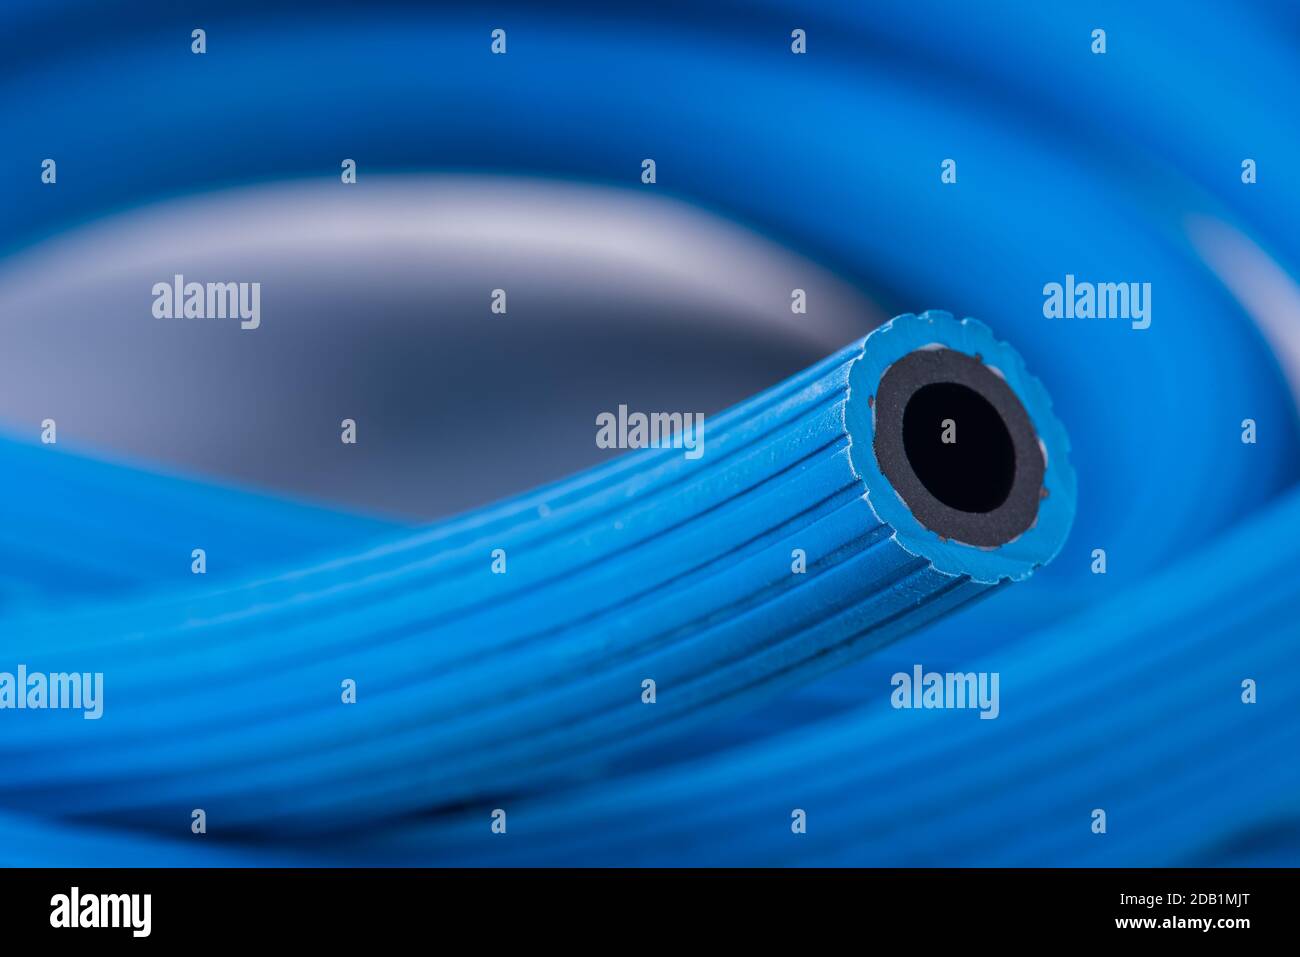 Hose for conveying oxygen in industrial applications, close-up Stock Photo